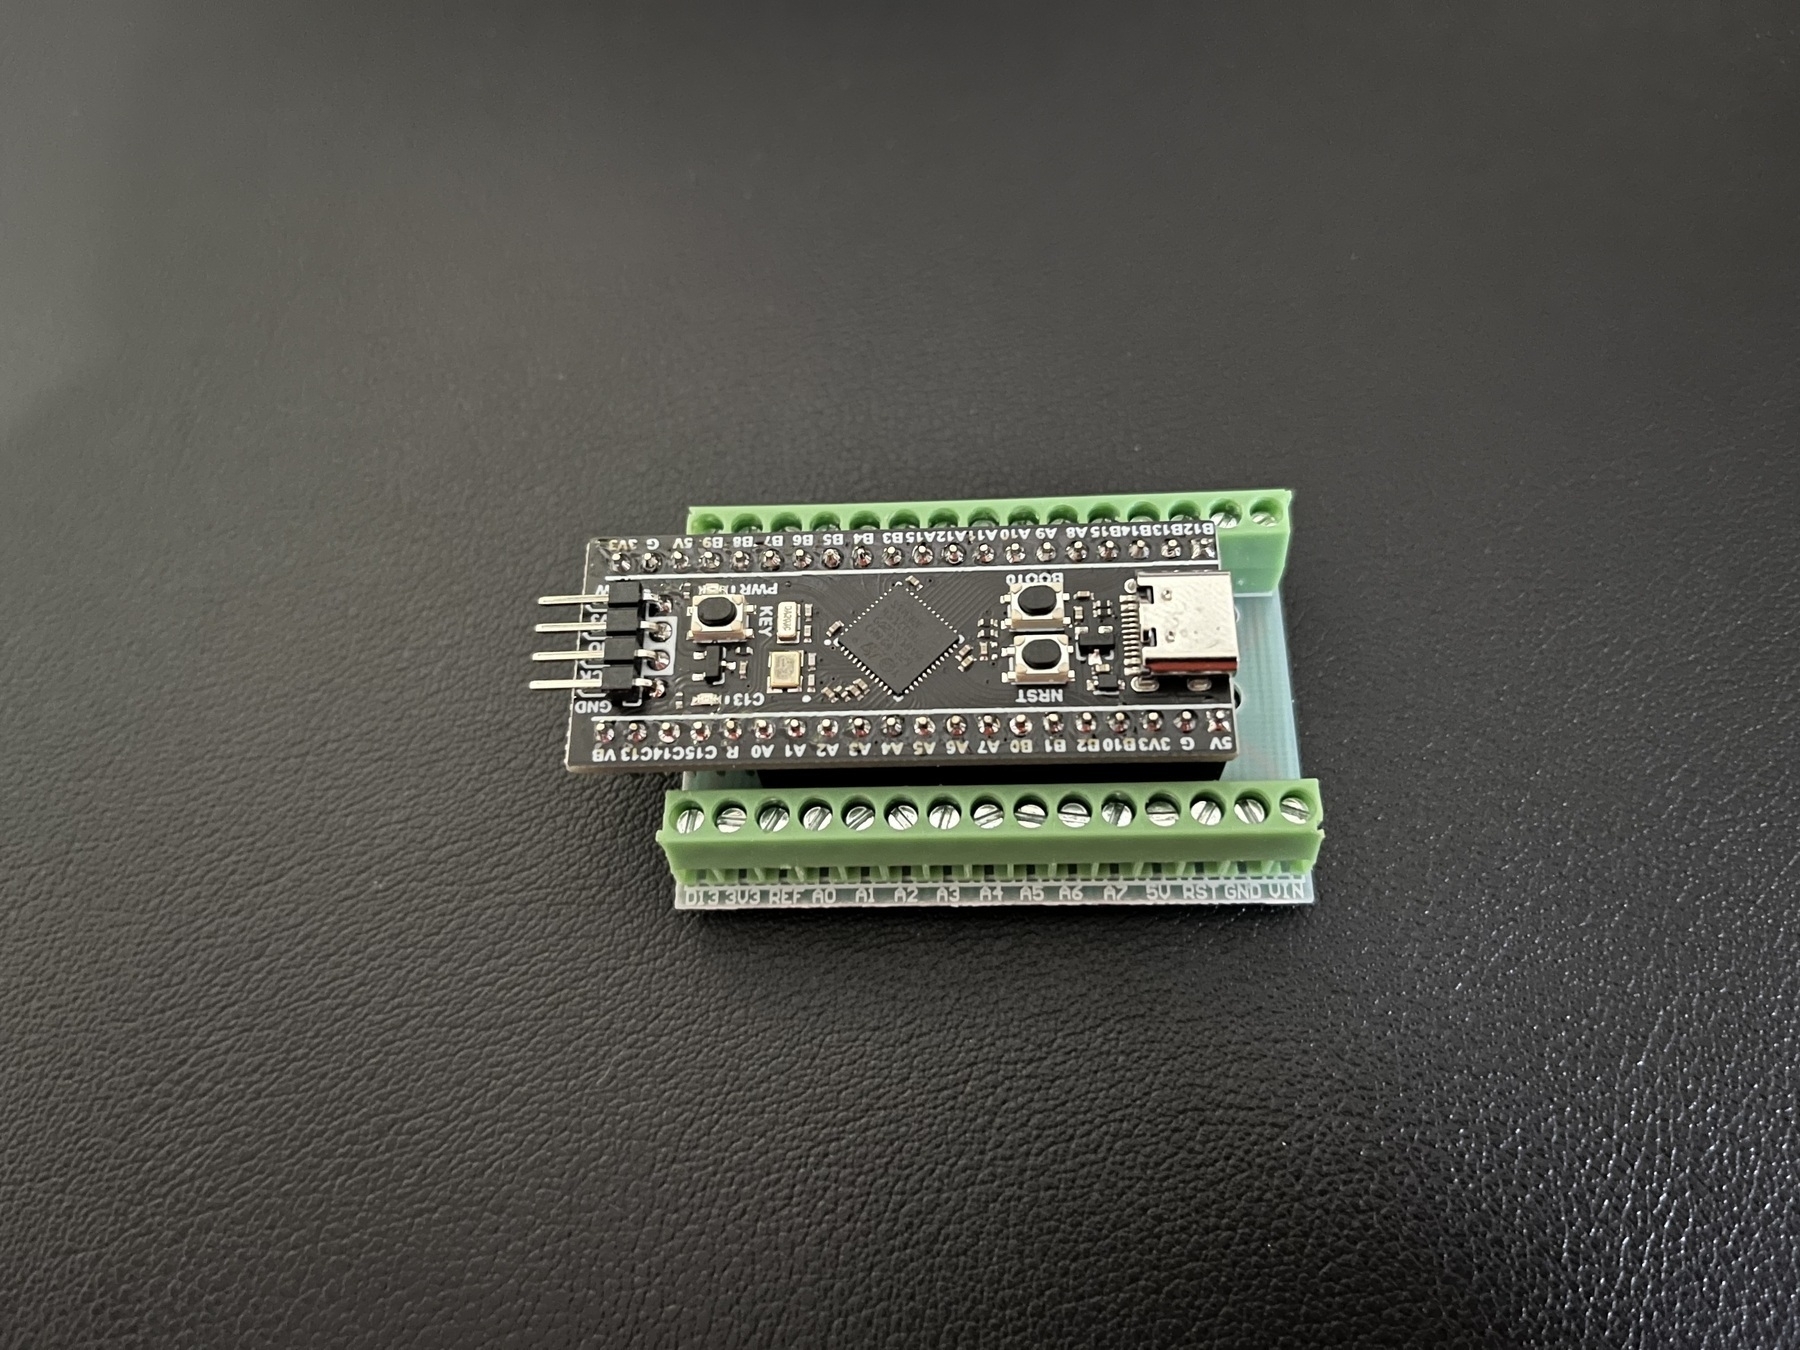 Photo of a microcontroller inserted into a breakout board with terminal blocks.